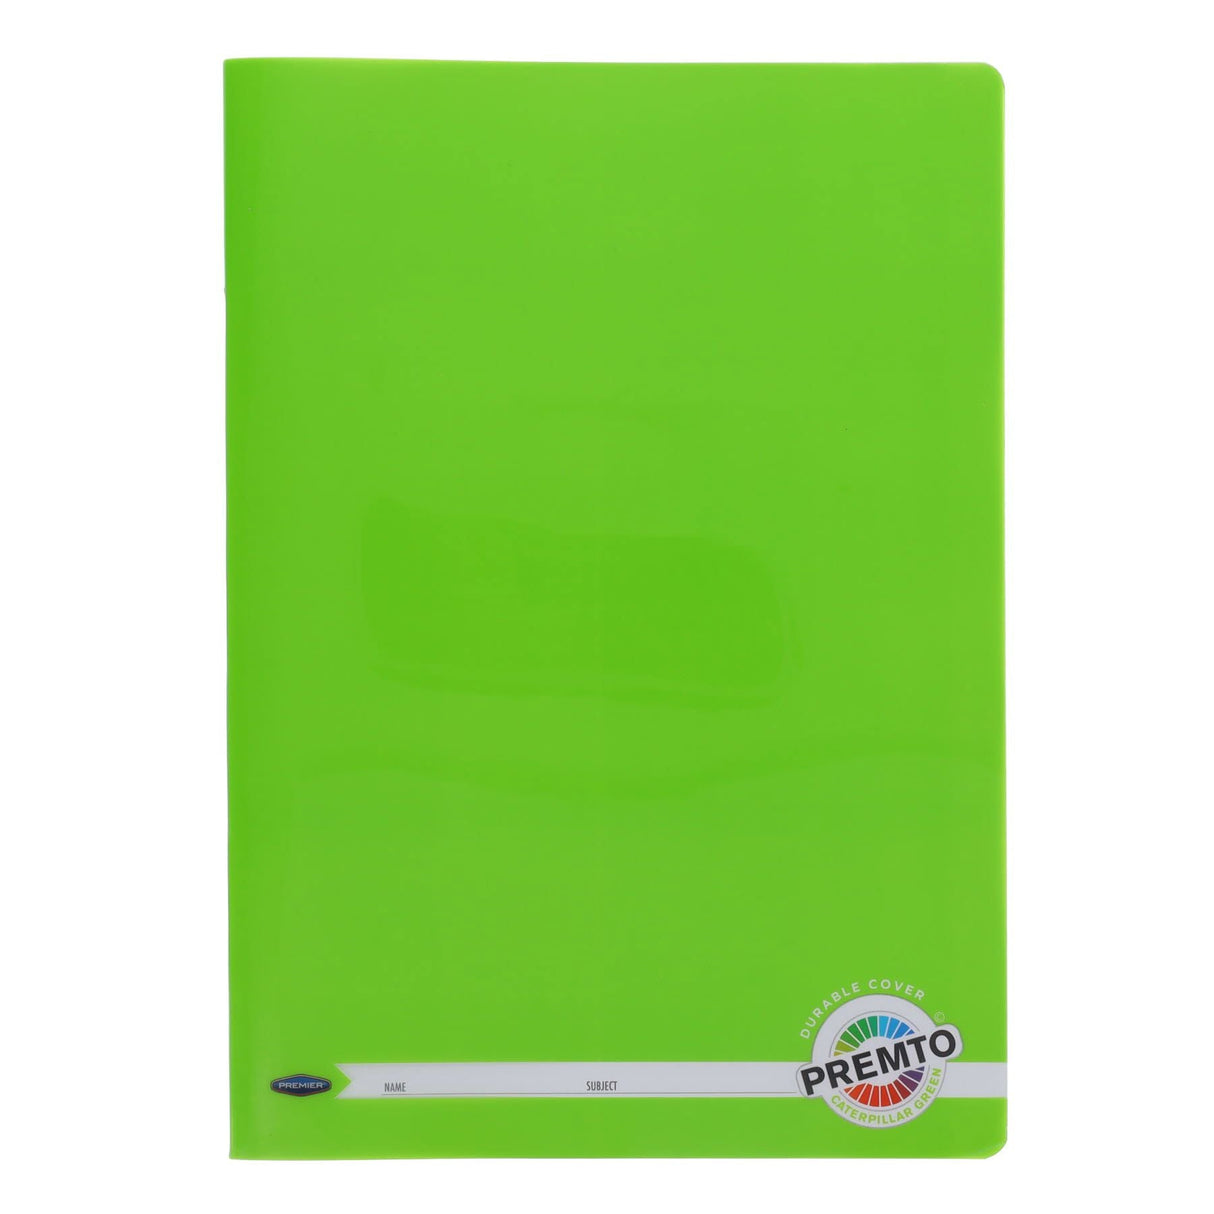 Premto A4 Durable Cover Manuscript Book S1 - 120 Pages - Caterpillar Green | Stationery Shop UK